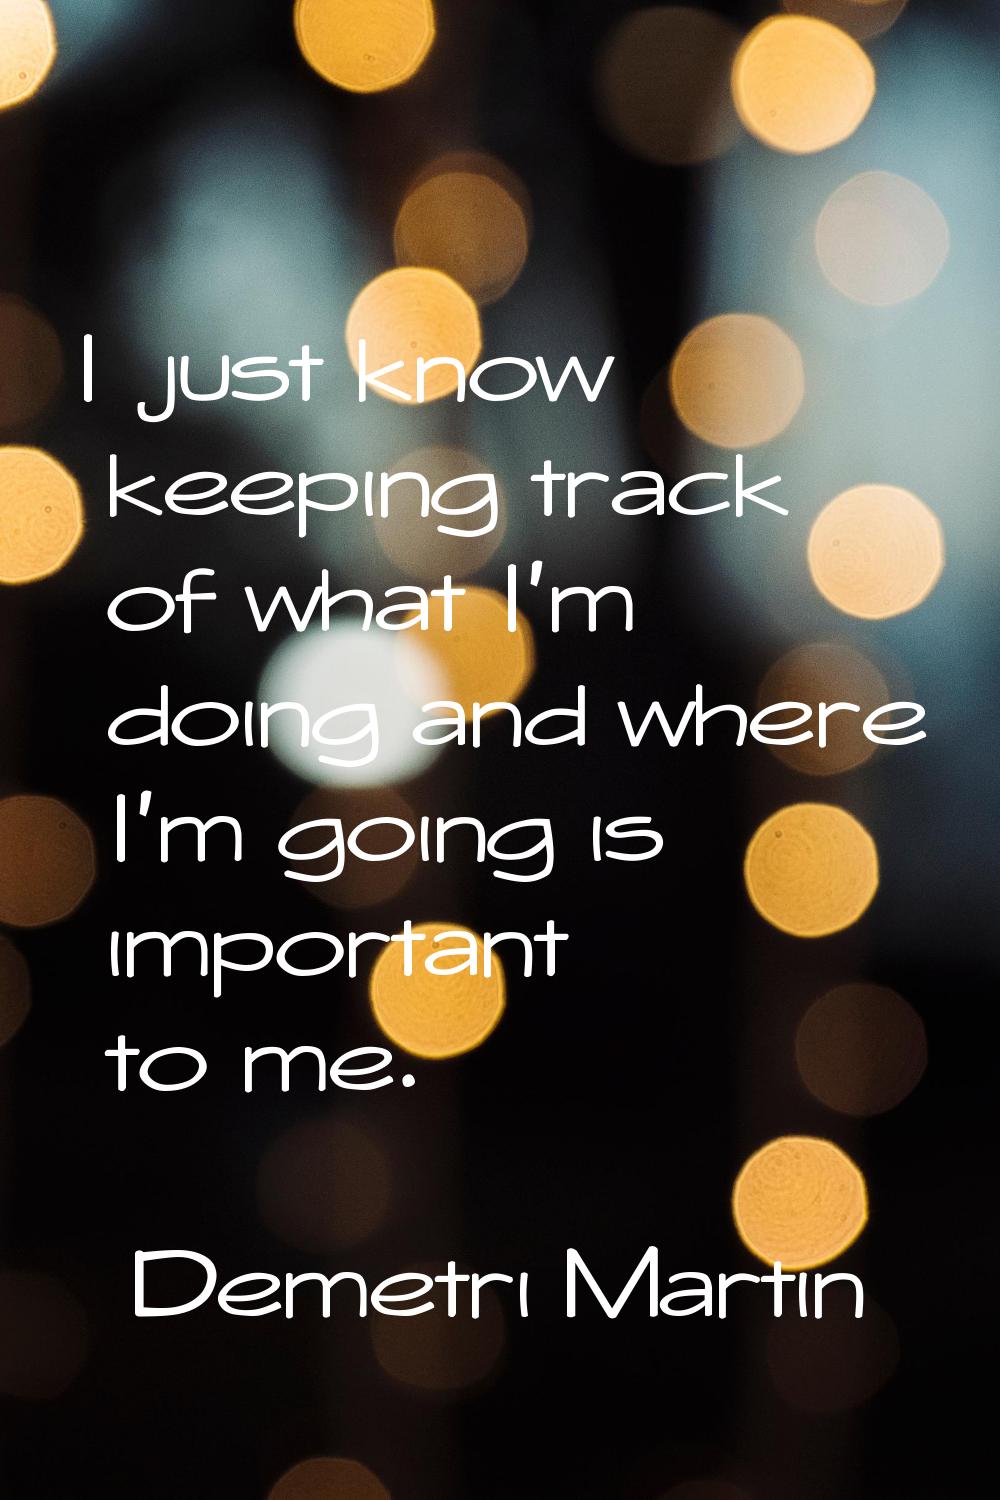 I just know keeping track of what I'm doing and where I'm going is important to me.